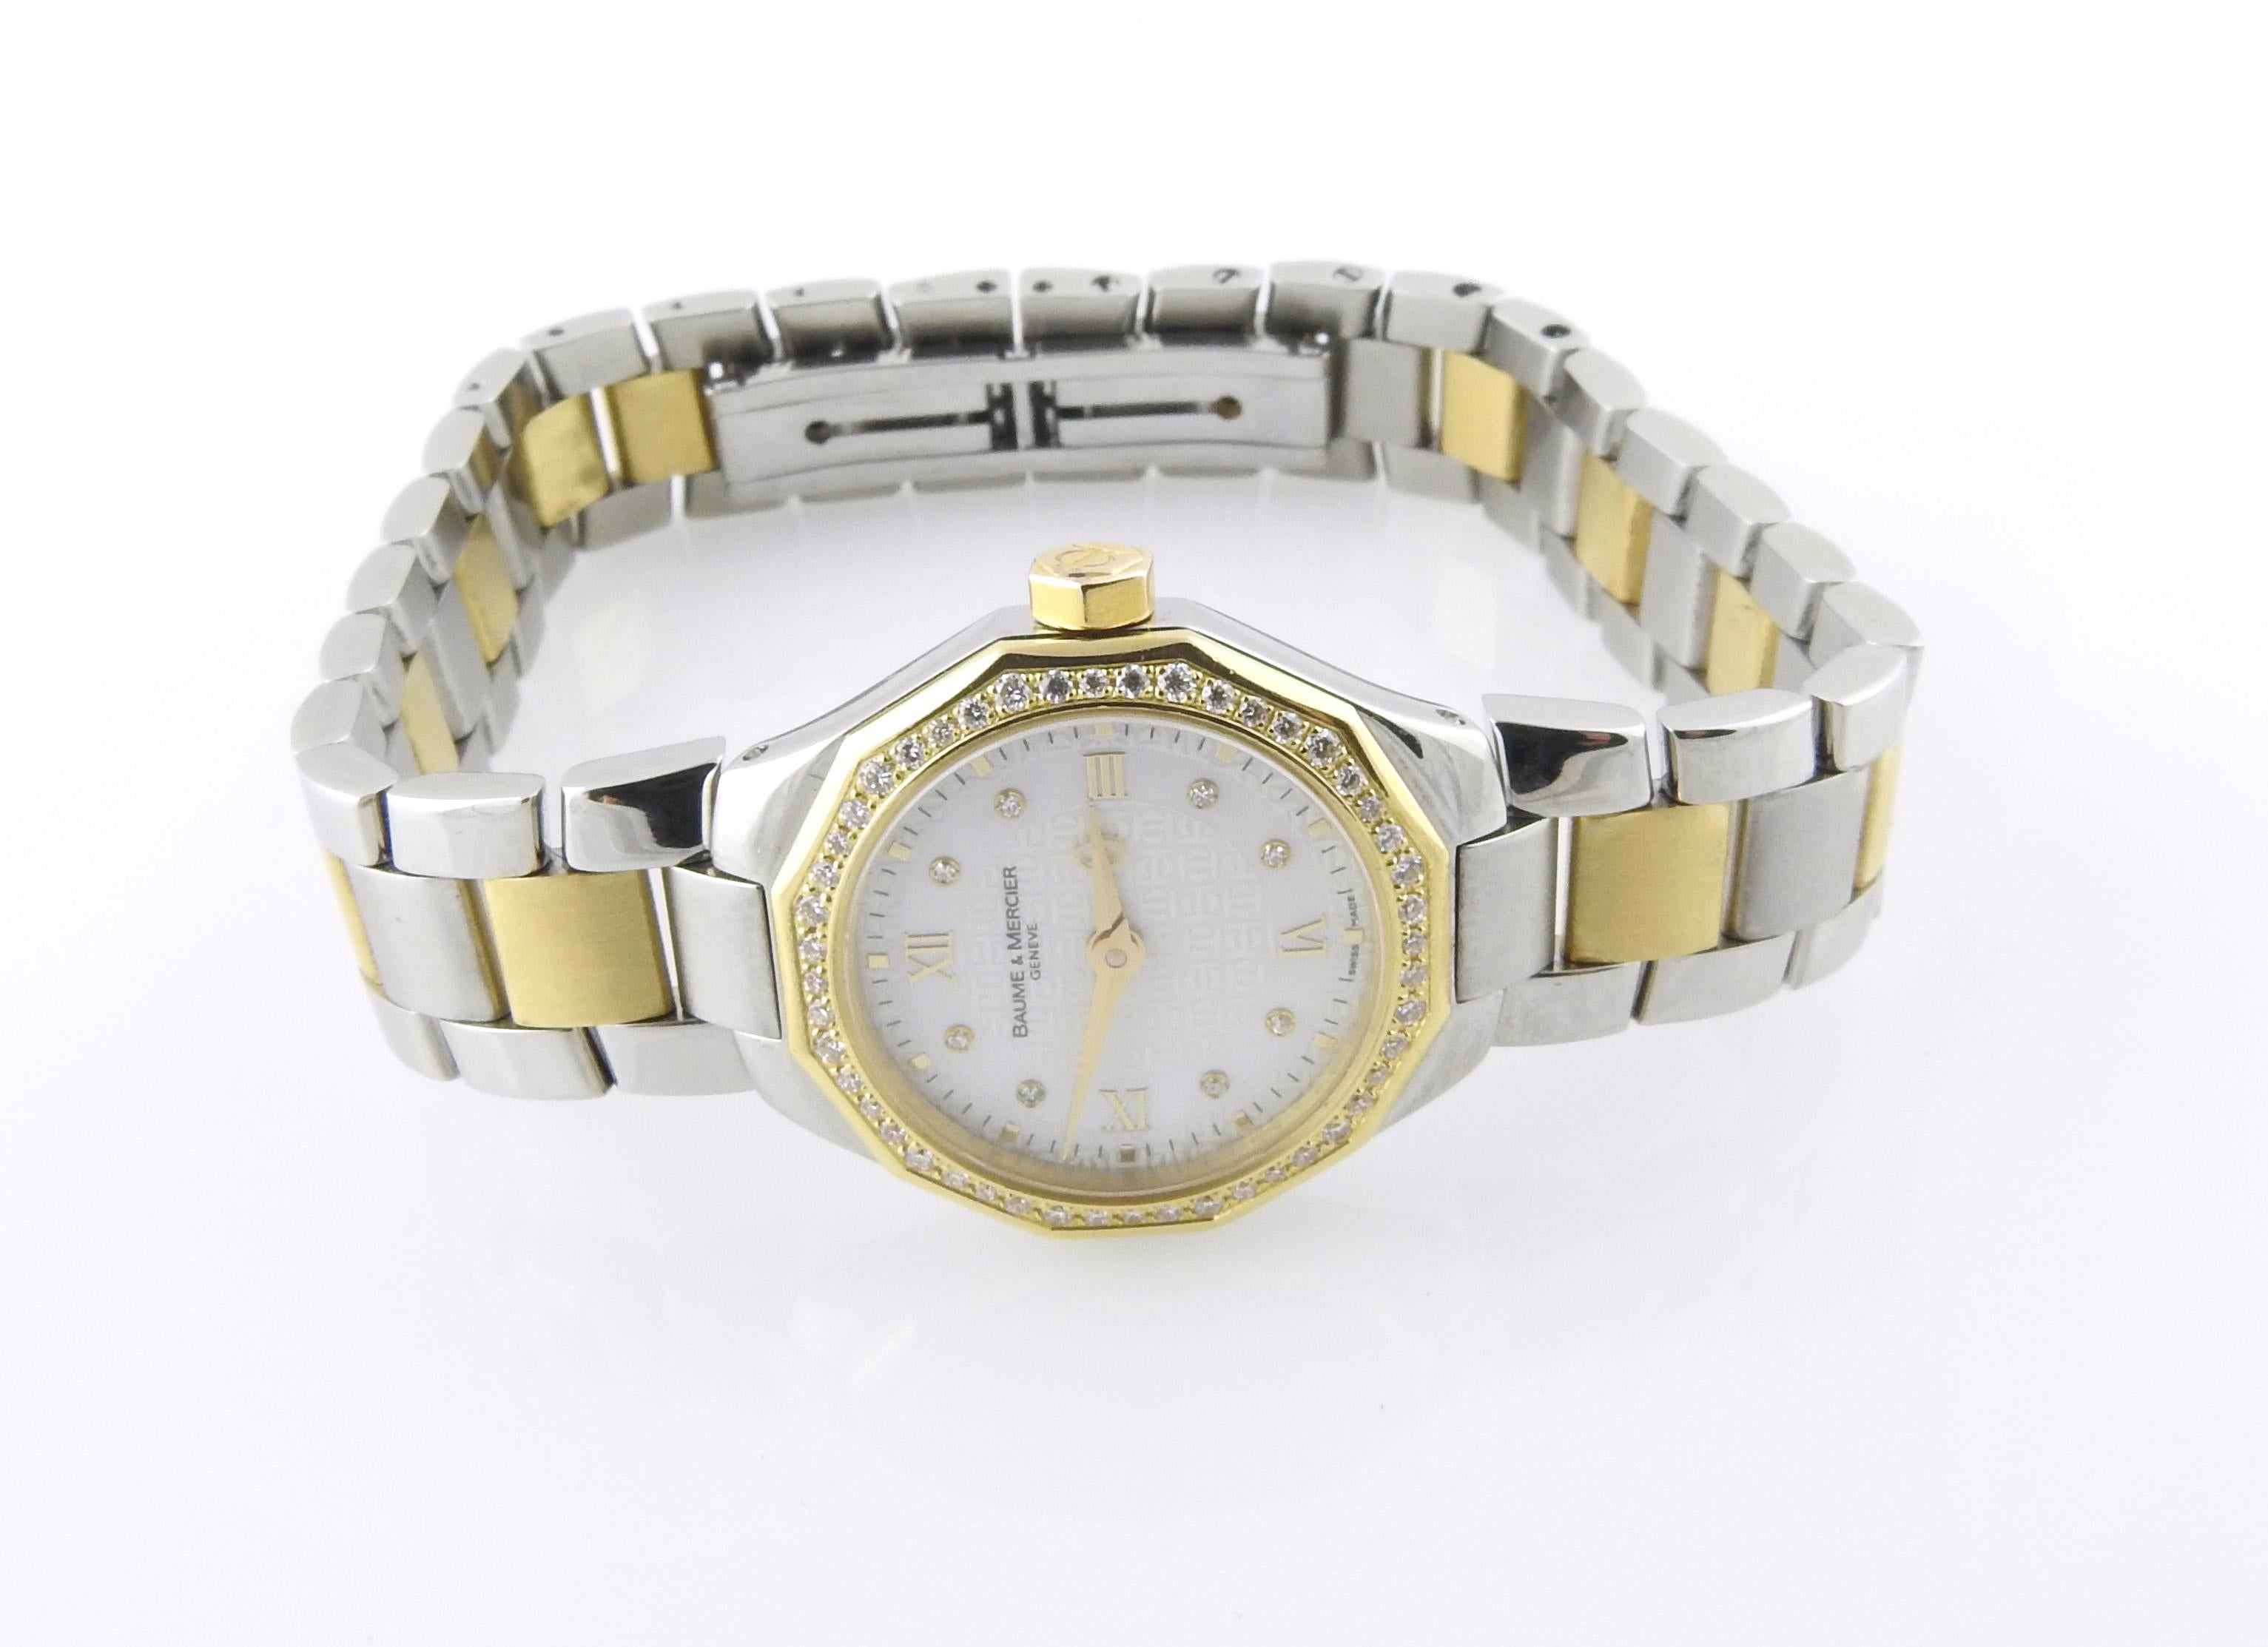 Baume & Mercier Riviera Mini Ladies Watch

Model: MOA08550
Serial: 65508

Stainless steel case with 18K yellow gold diamond bezel - 22mm

Two tone bracelet - fits up to 6 3/4